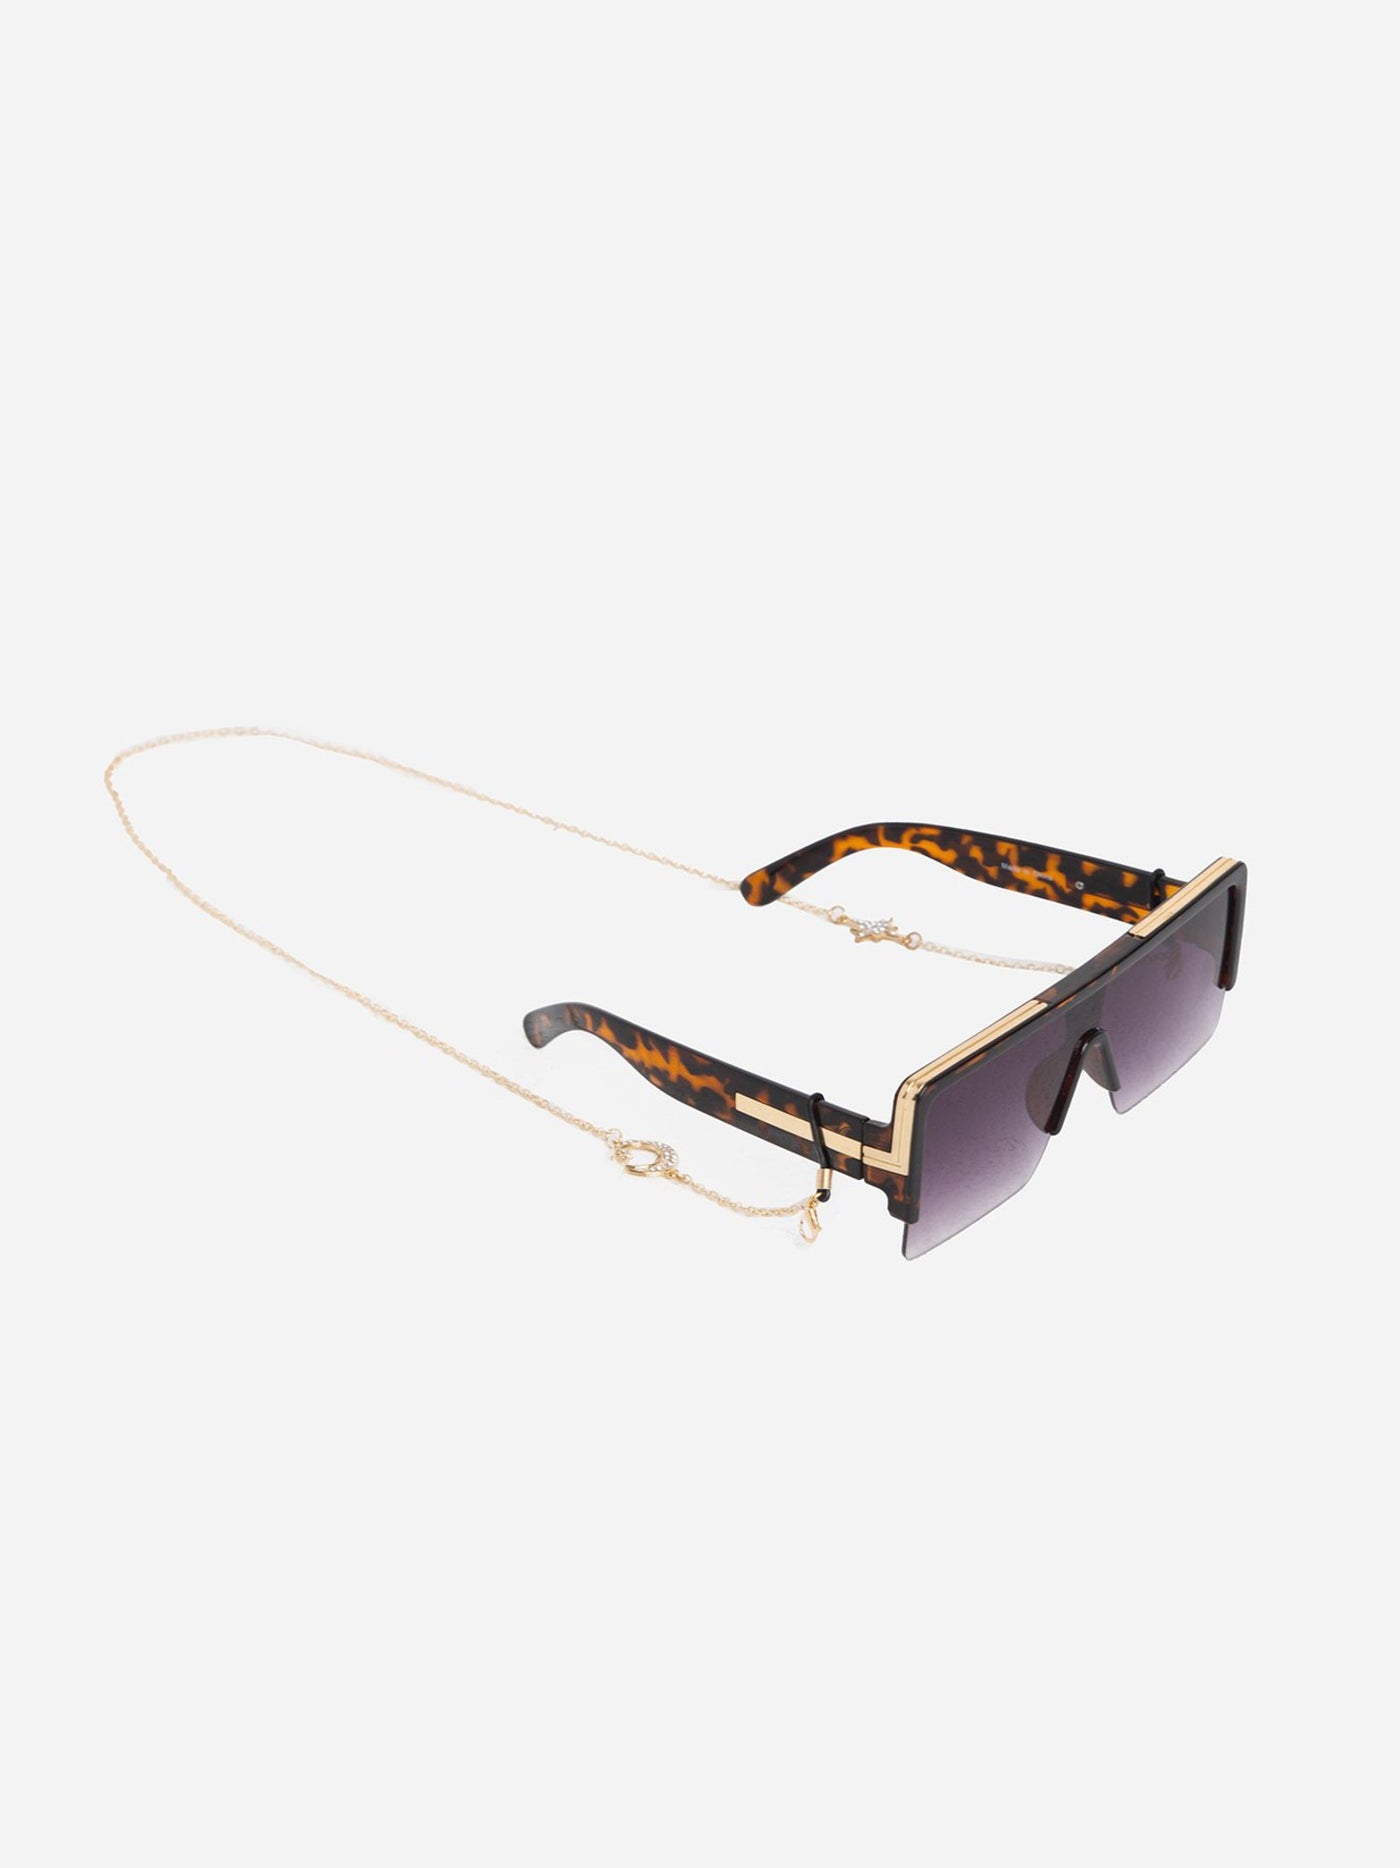 Sunglasses Chain - With Strass Shapes